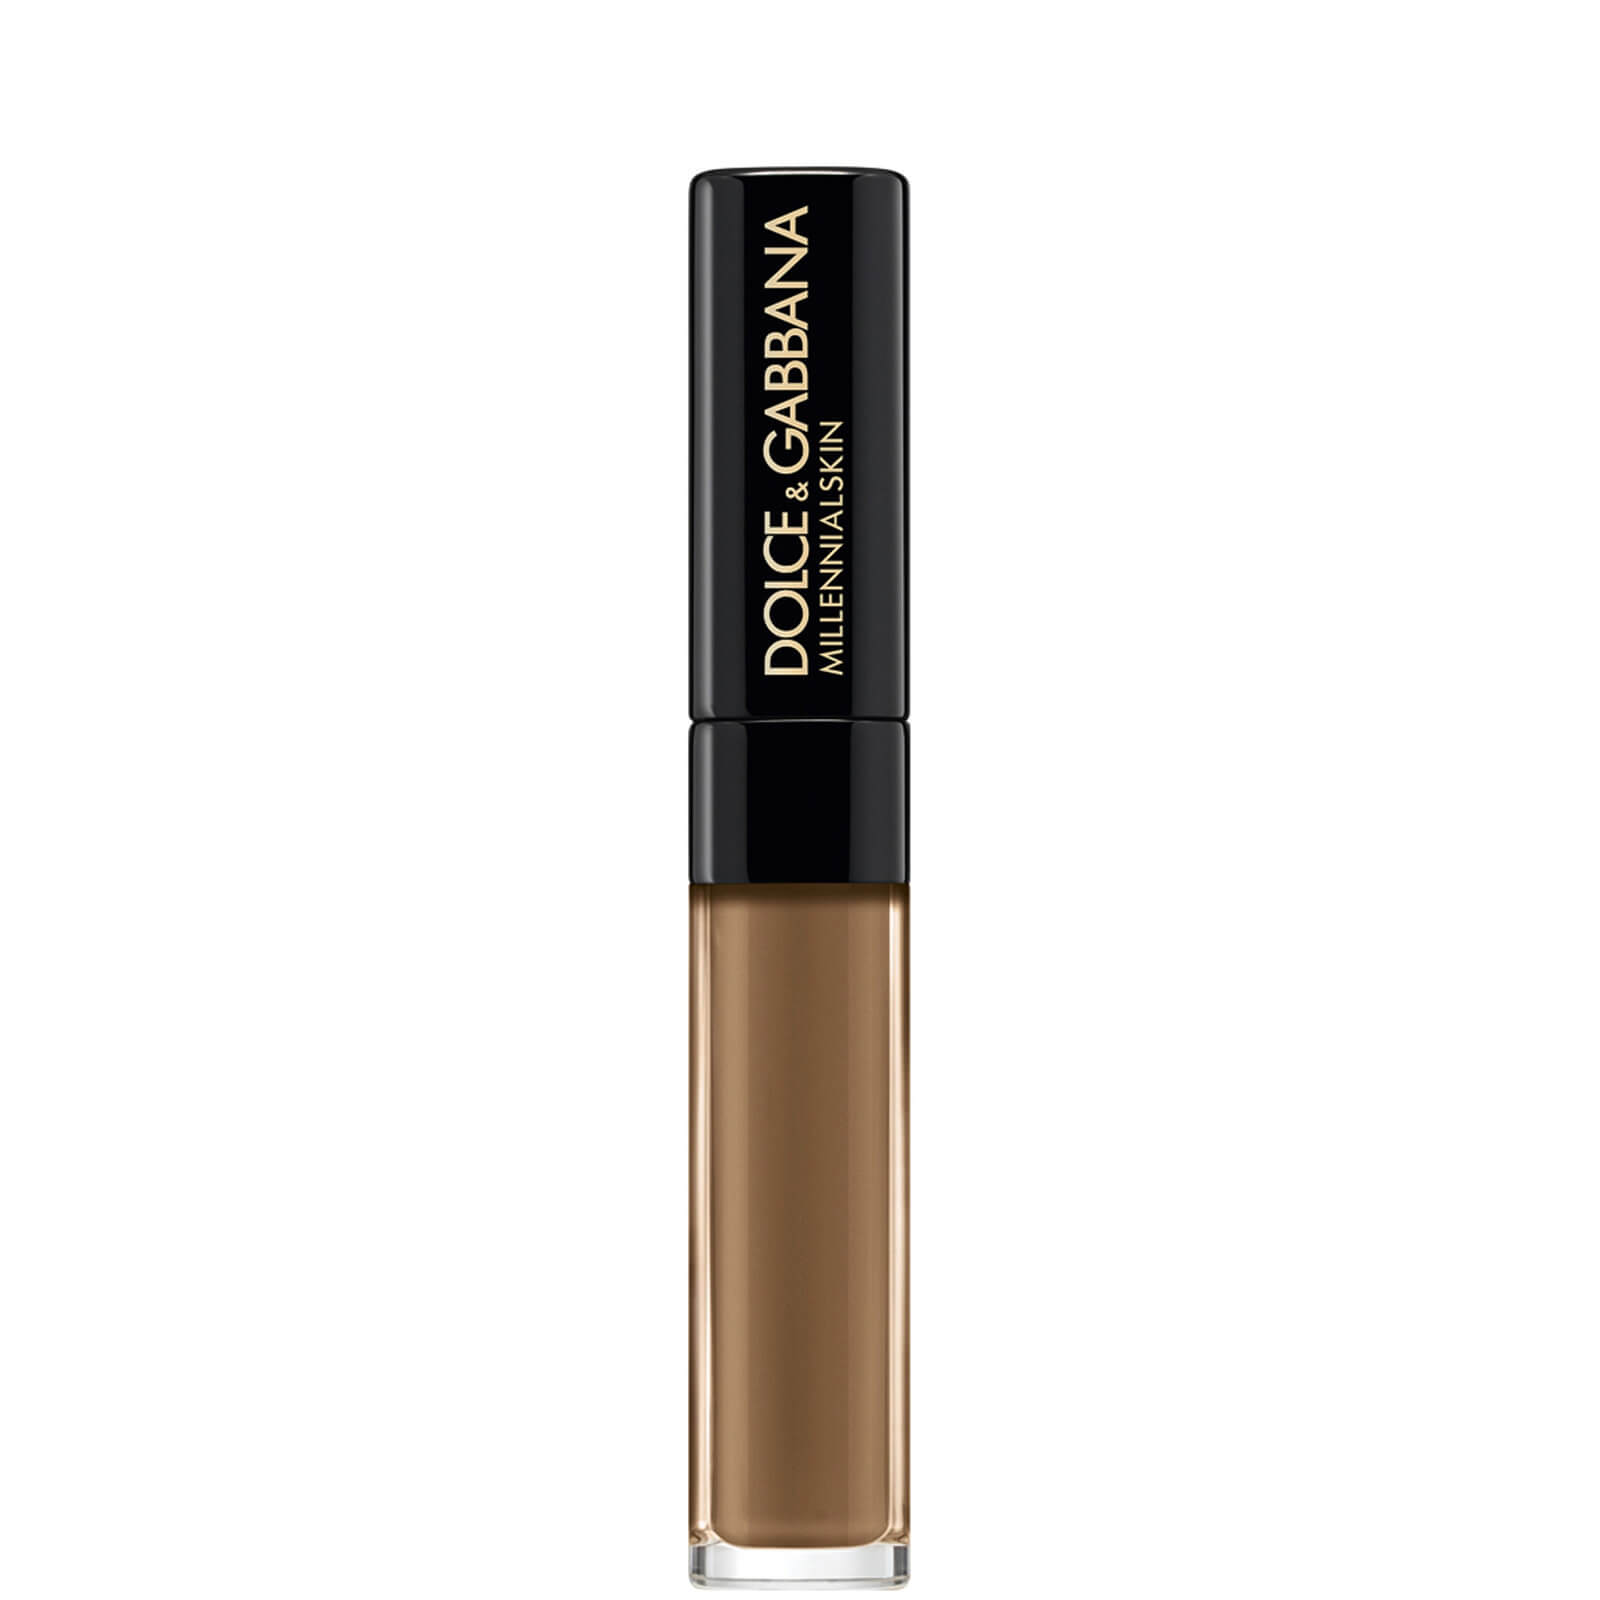 Image of Dolce&Gabbana Millenialskin On-the-Glow Concealer 5ml (Various Shades) - 7 Amber